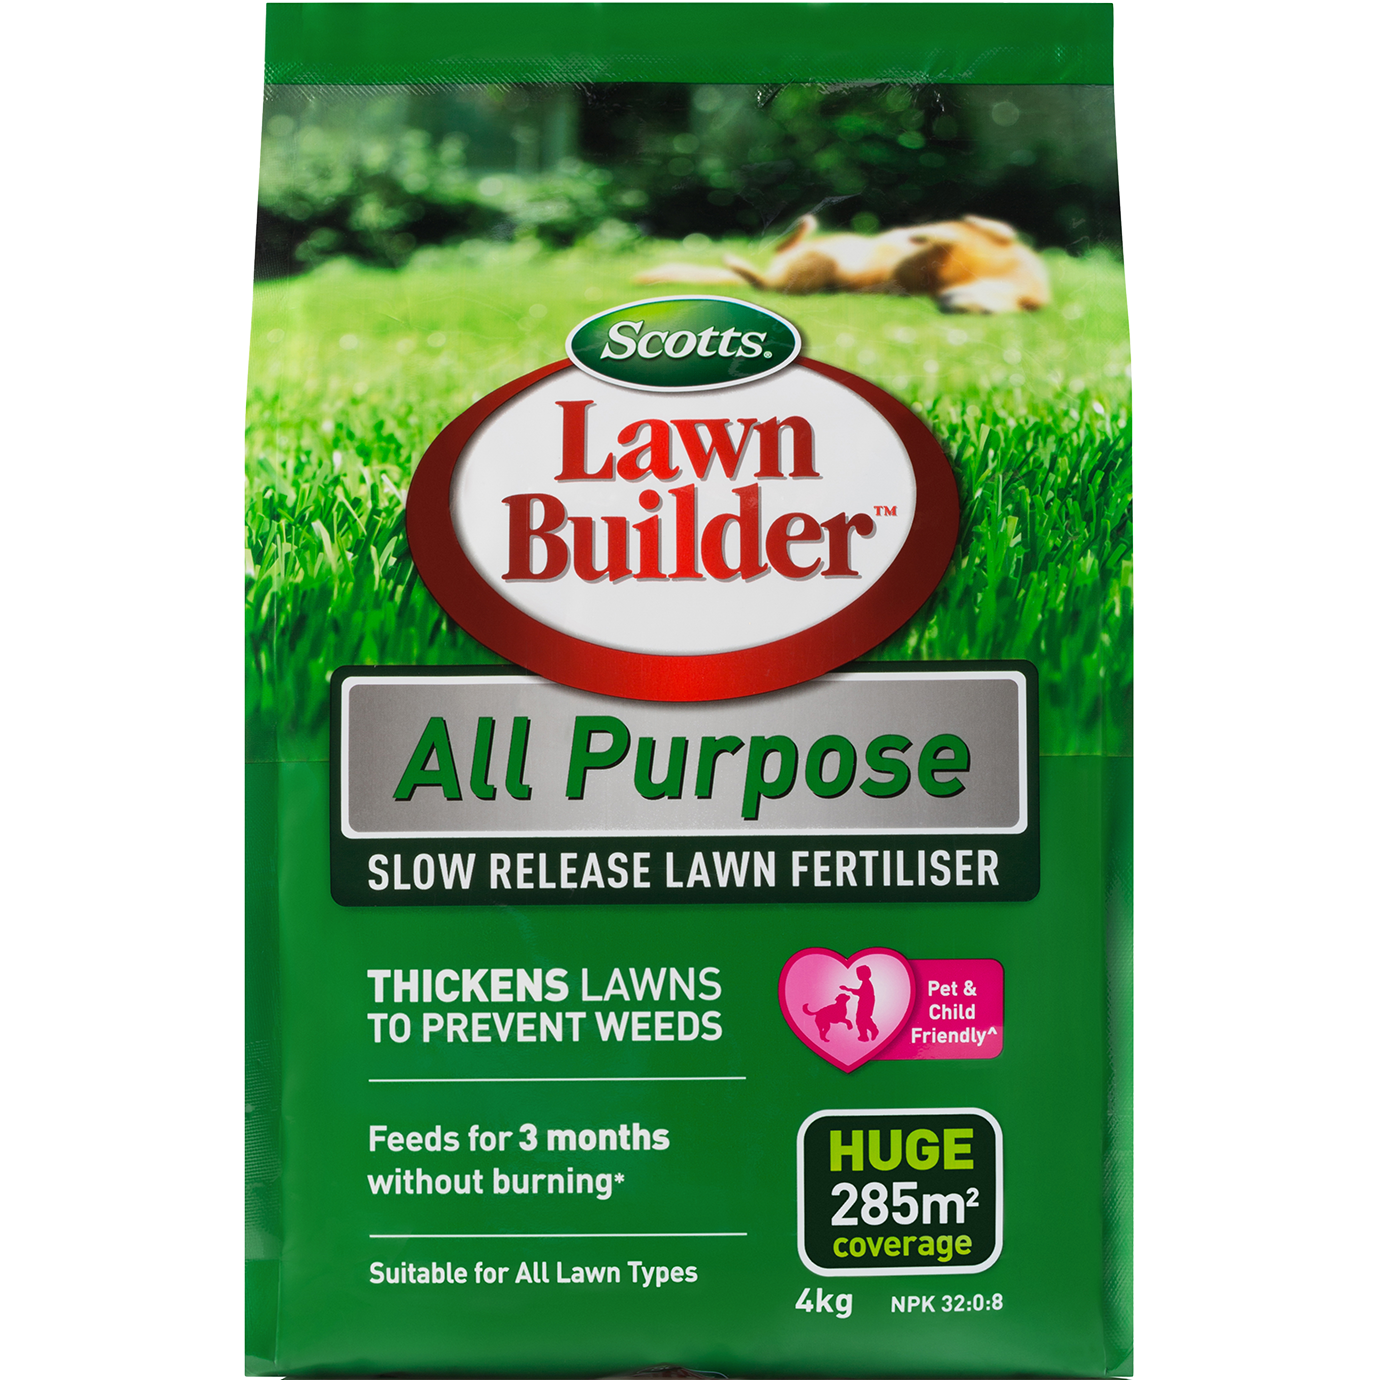 is grass seed and fertilizer harmful to dogs